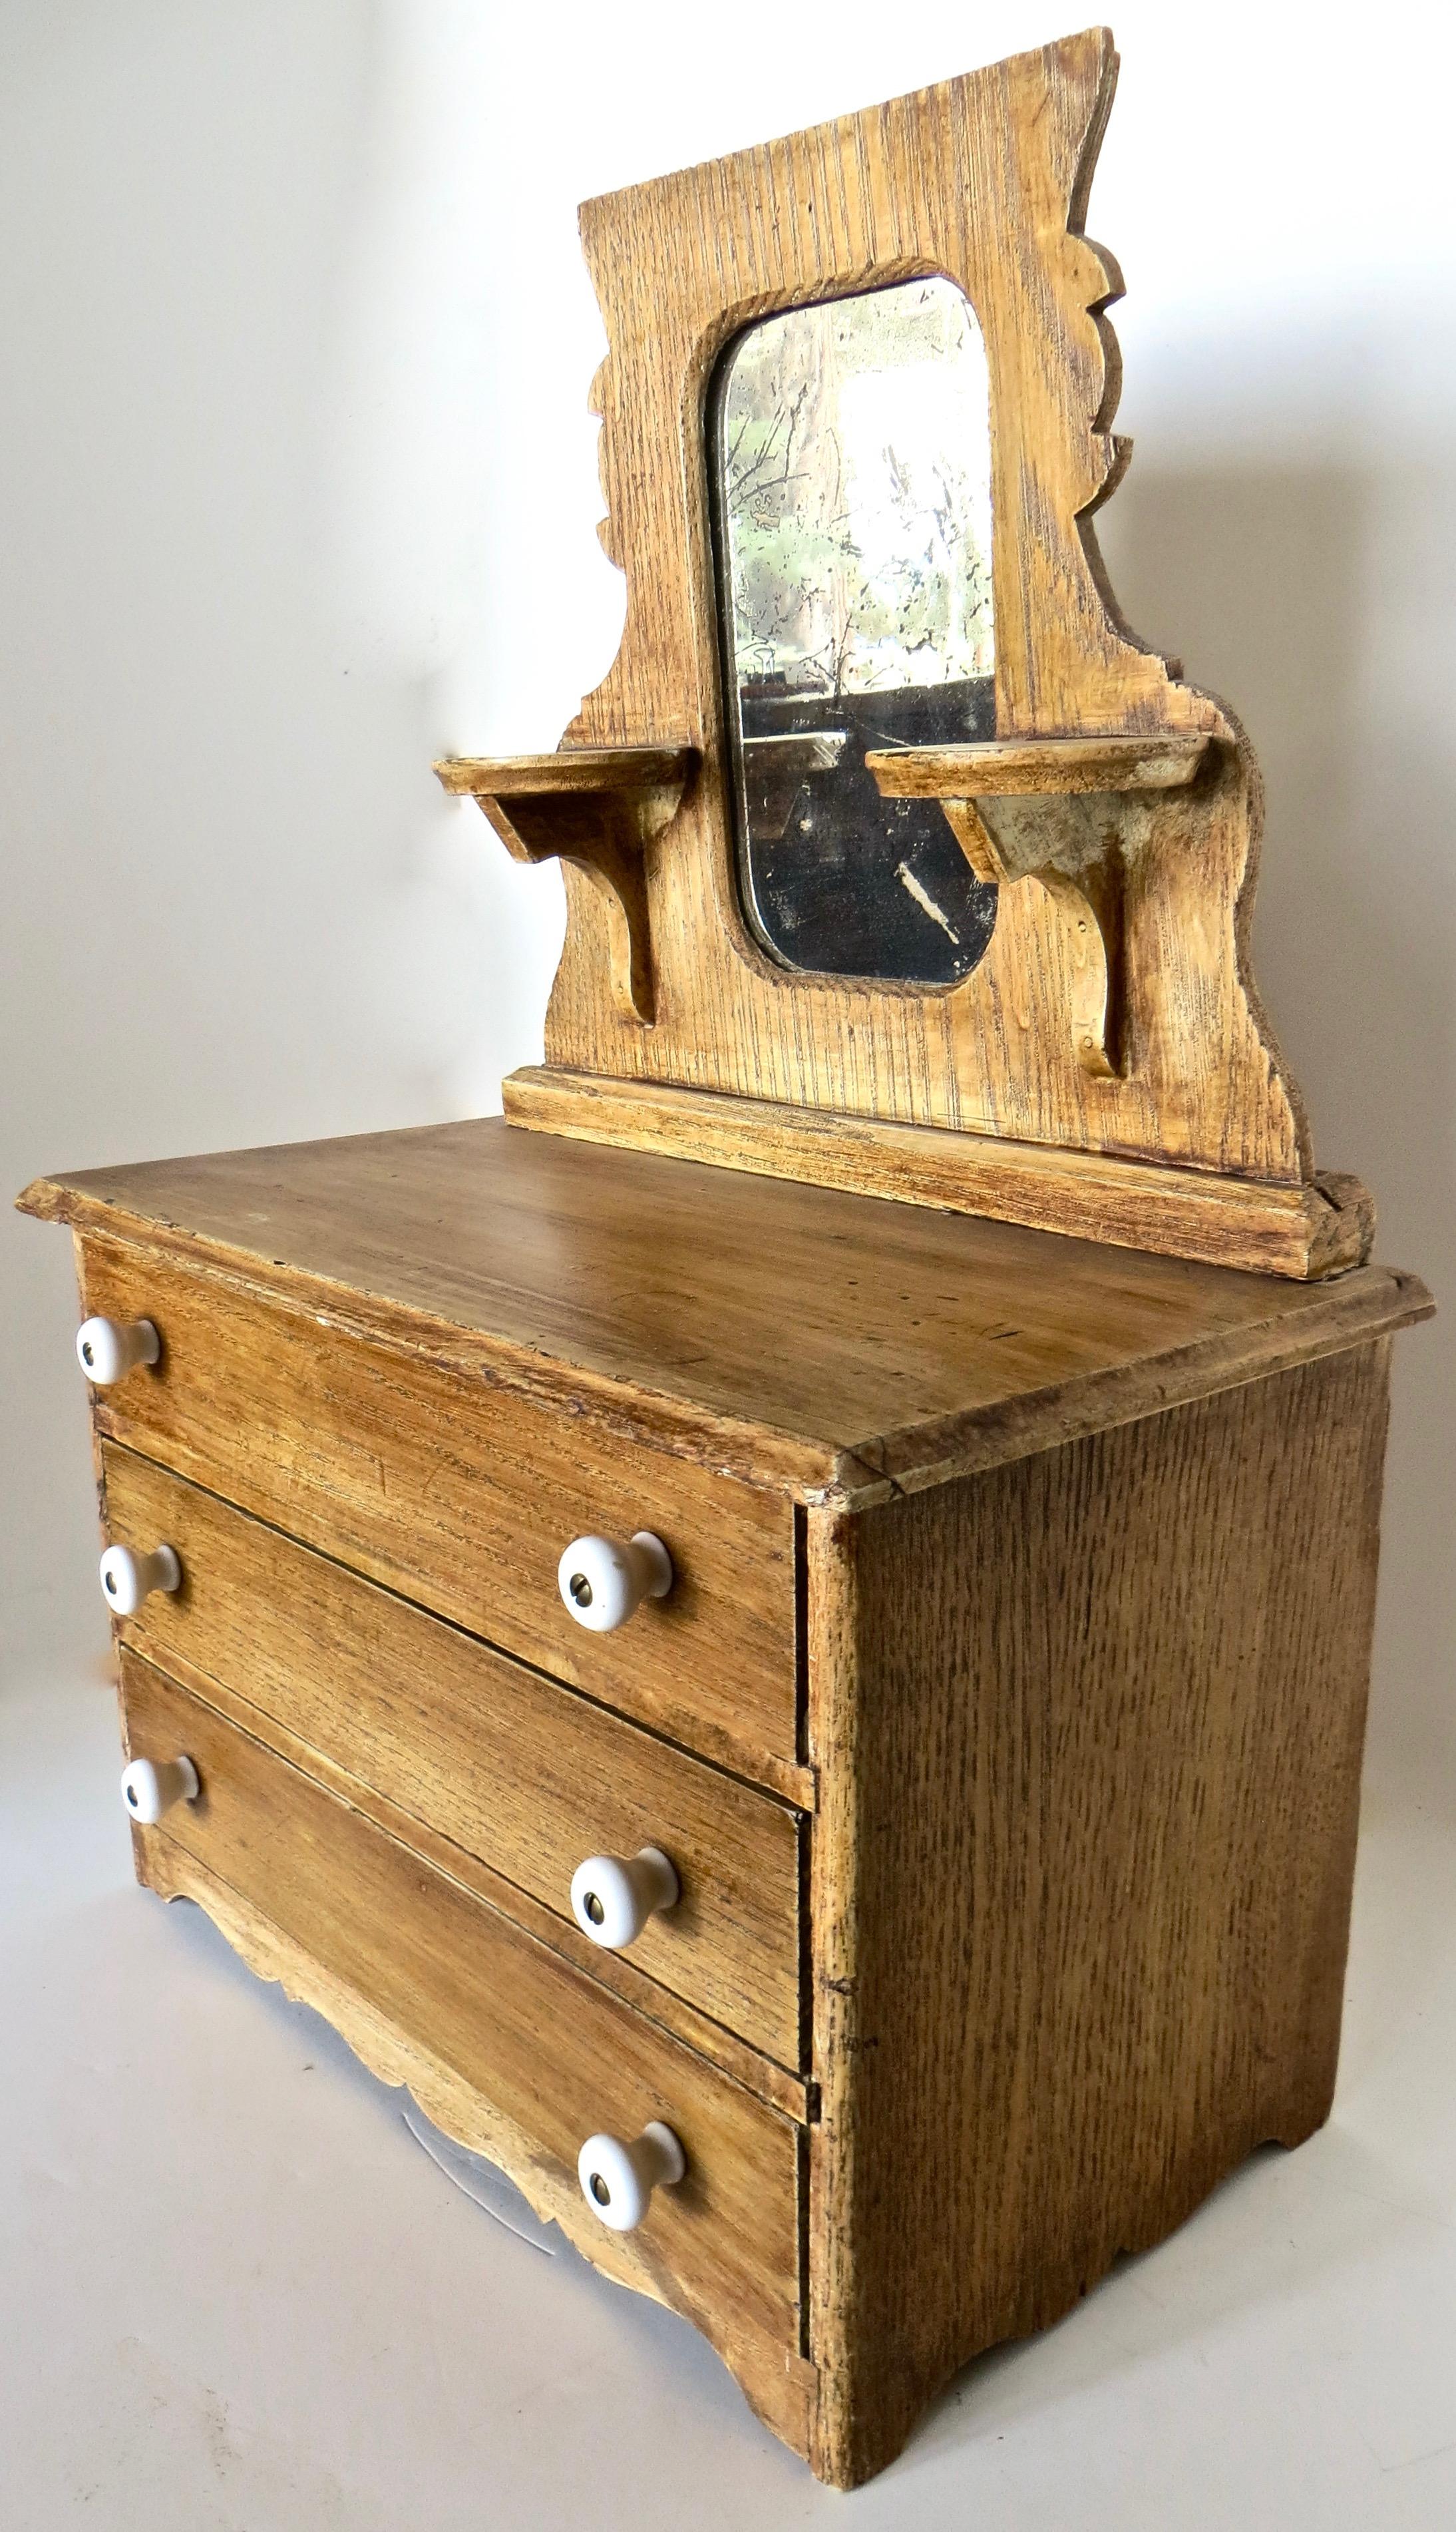 This late 19th century miniature 3-drawer dresser with original mirror mounted above, was likely used as a salesman's sample by an itinerant sales person who traveled the countryside promoting his articles, usually by seeking out merchants to take